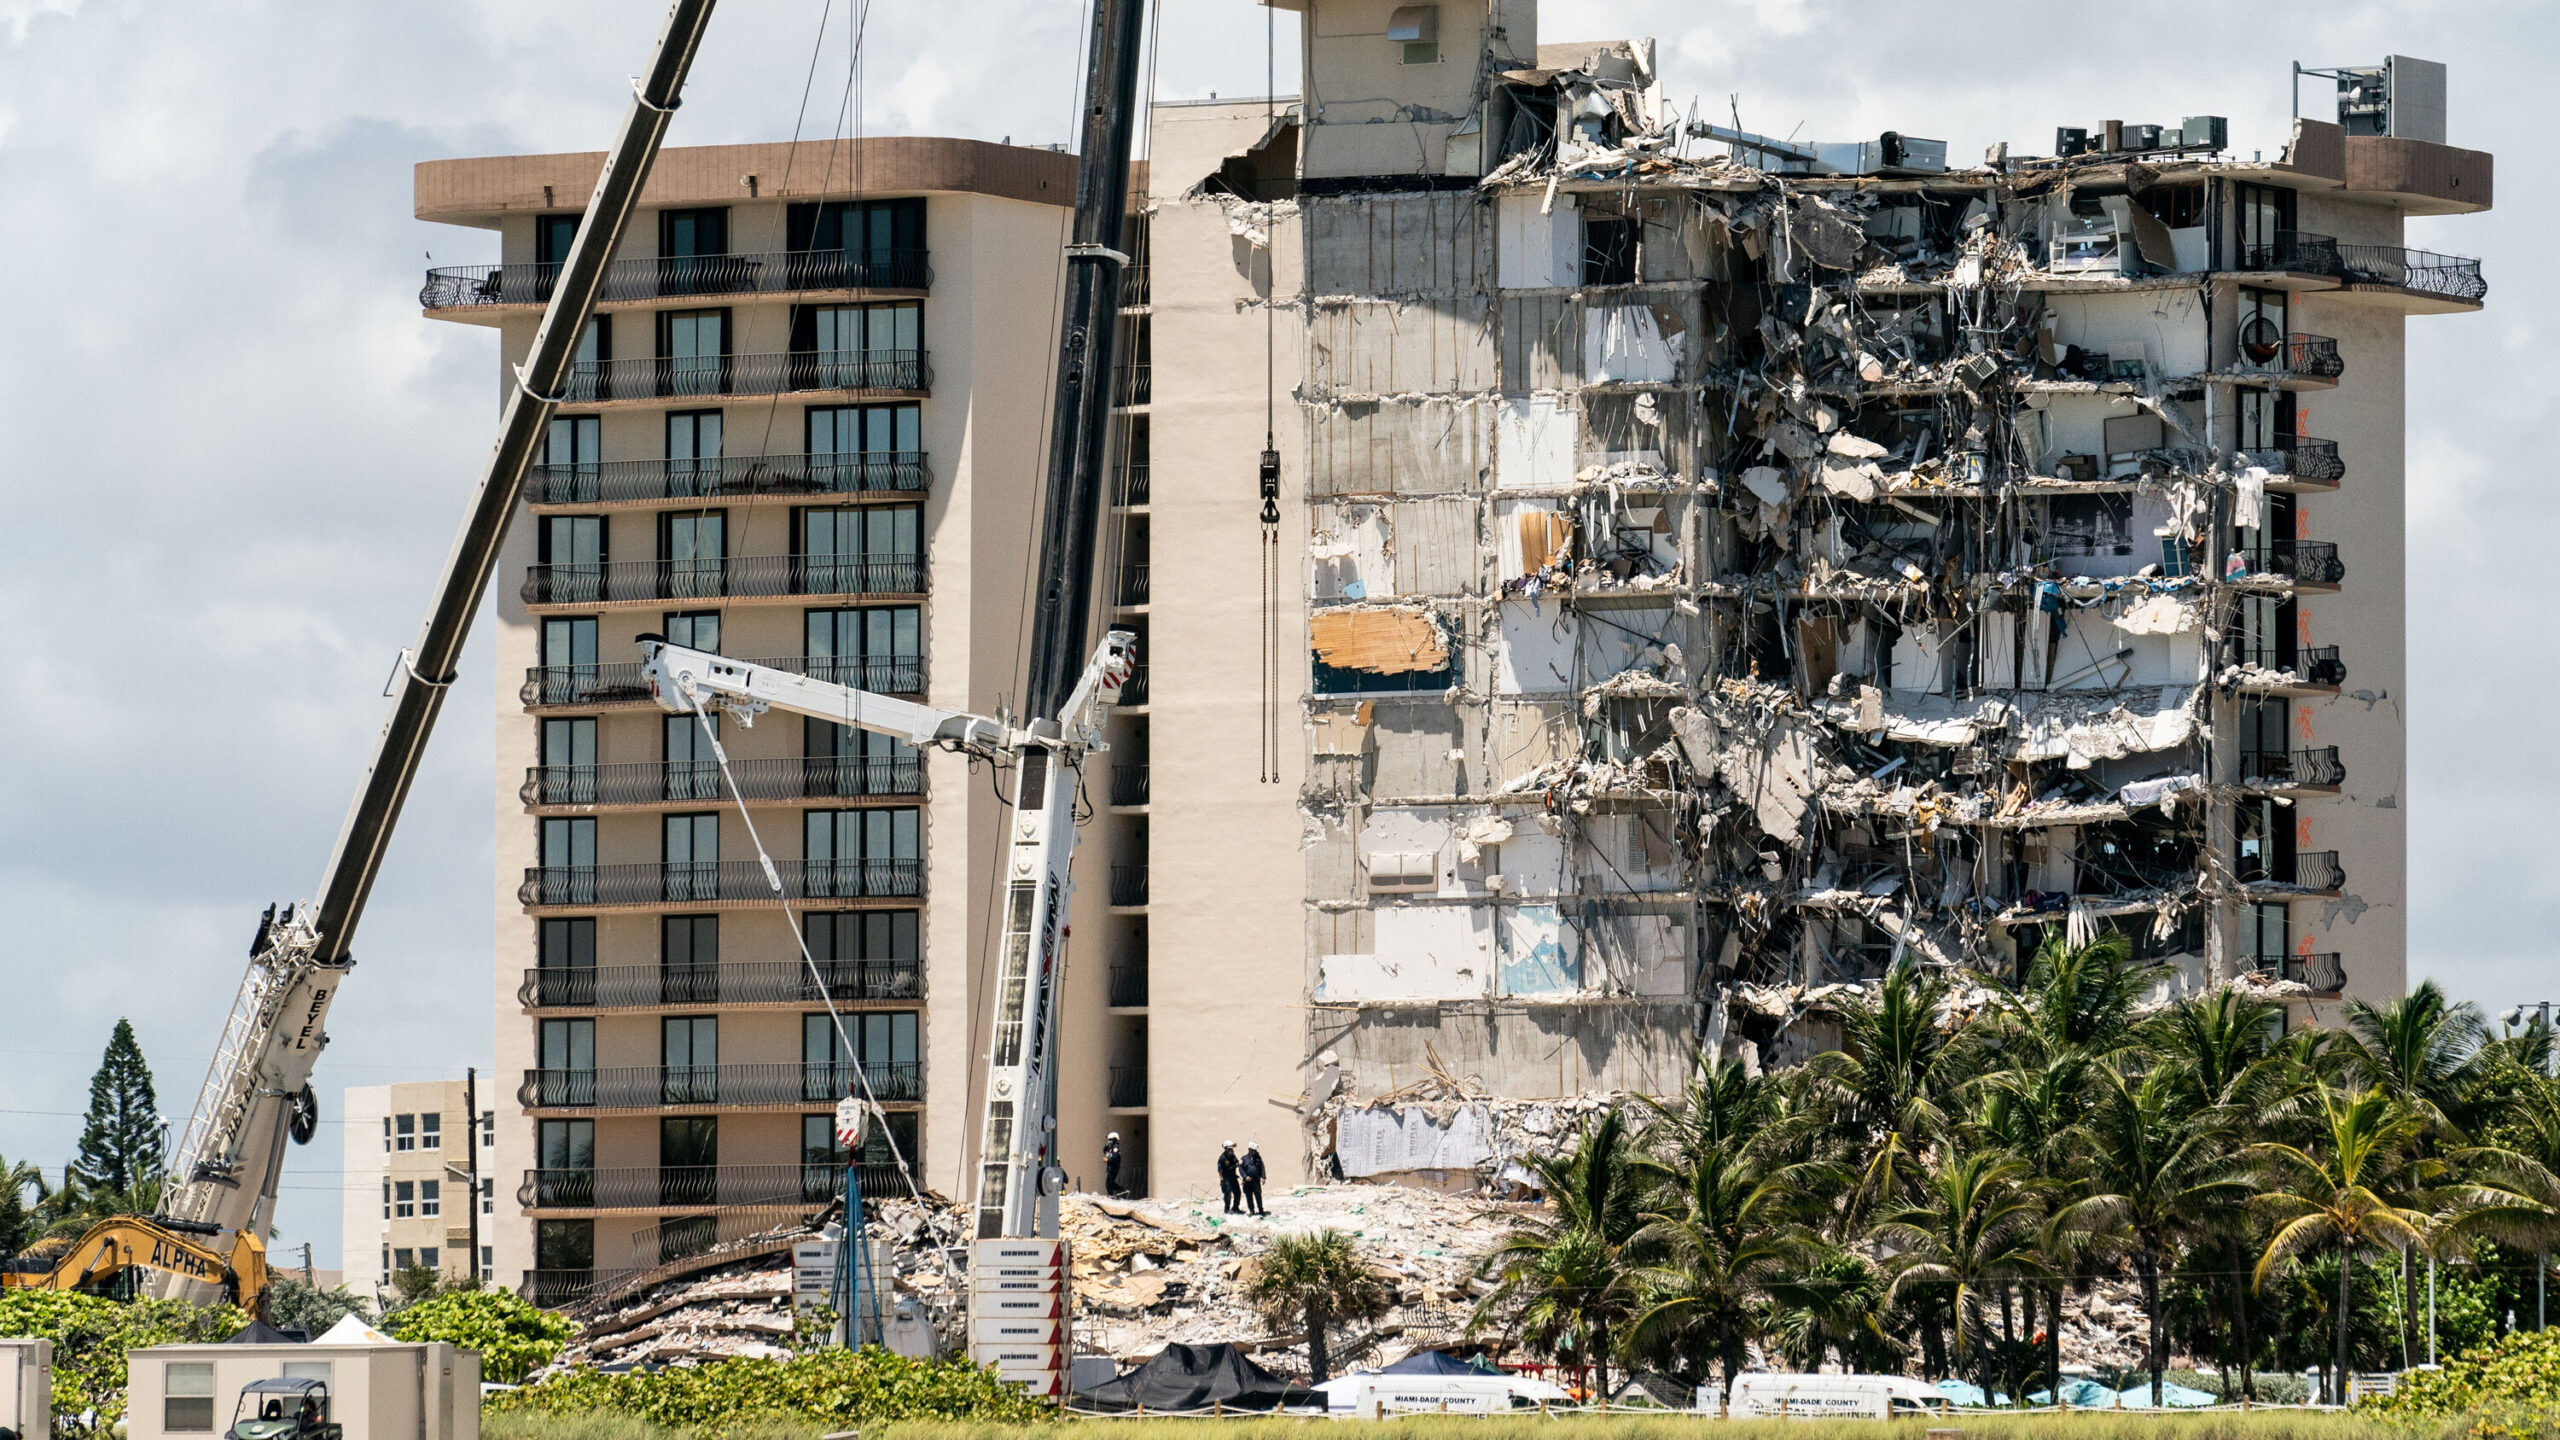 If a 2008 Florida law that required condos to plan for repairs had still been in place, “this never would have happened,” said the legislator who sponsored the law.